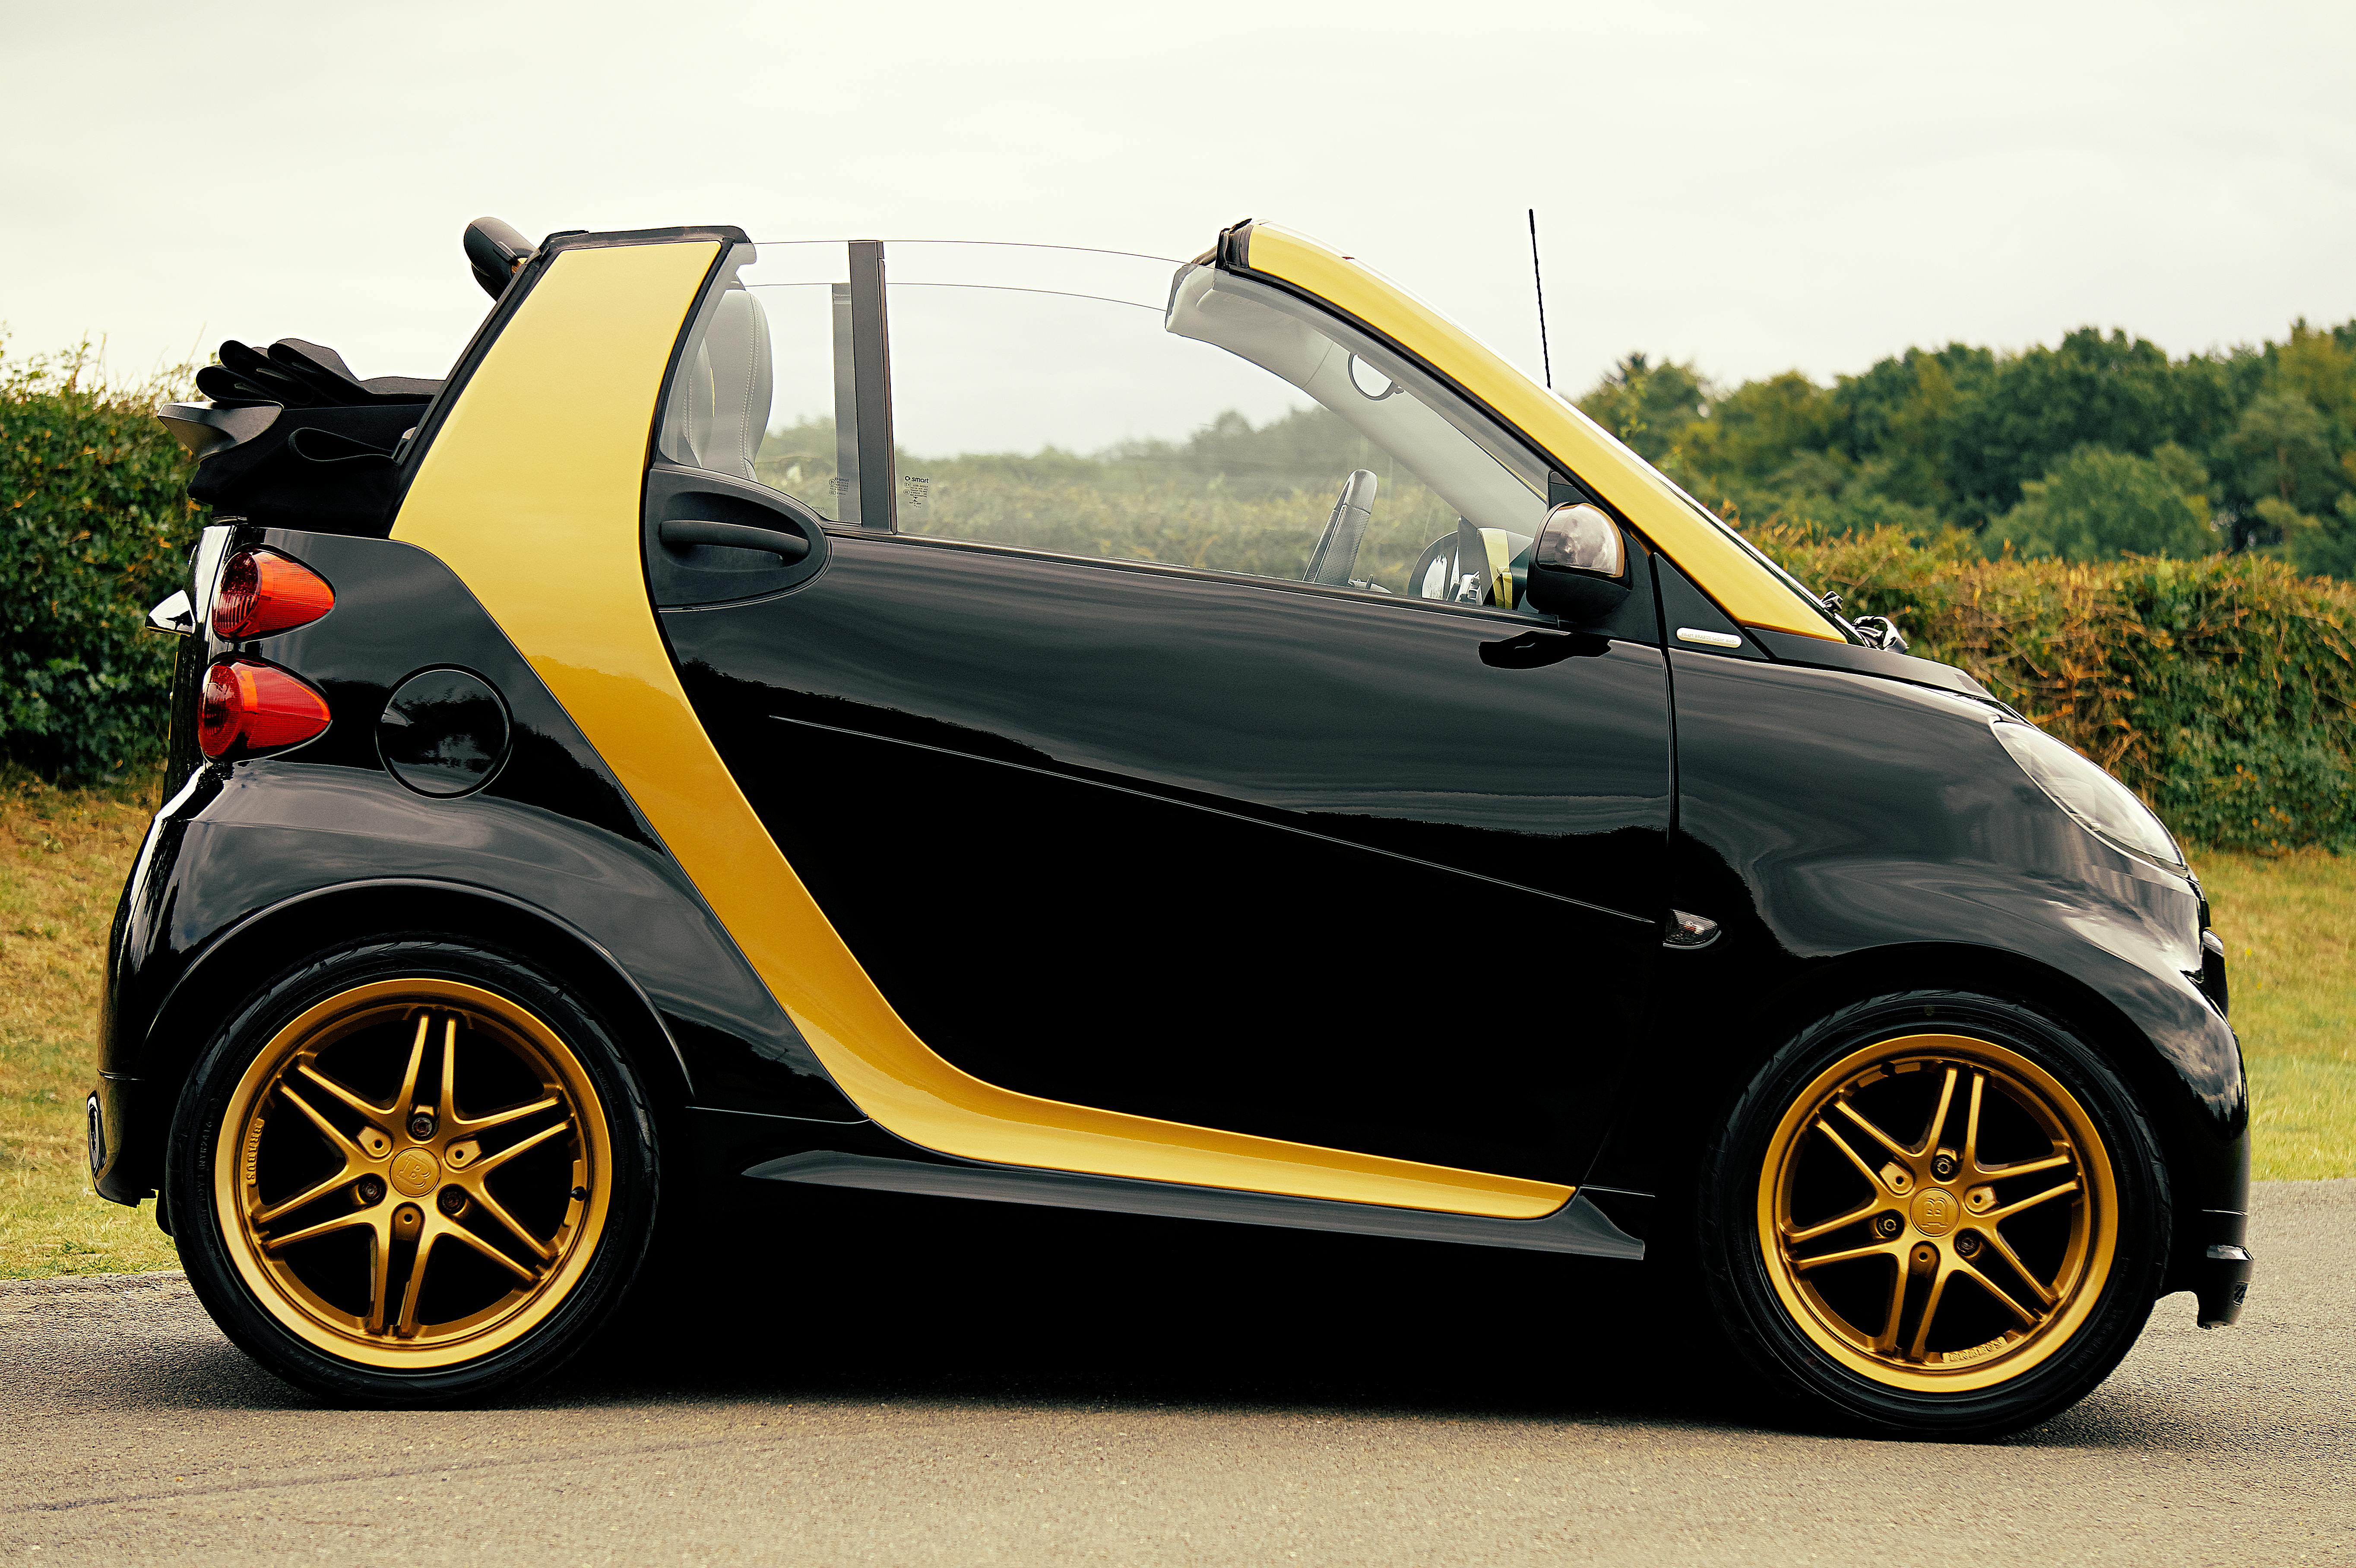 Black and Yellow Smart Car on Focus Photography · Free Stock Photo